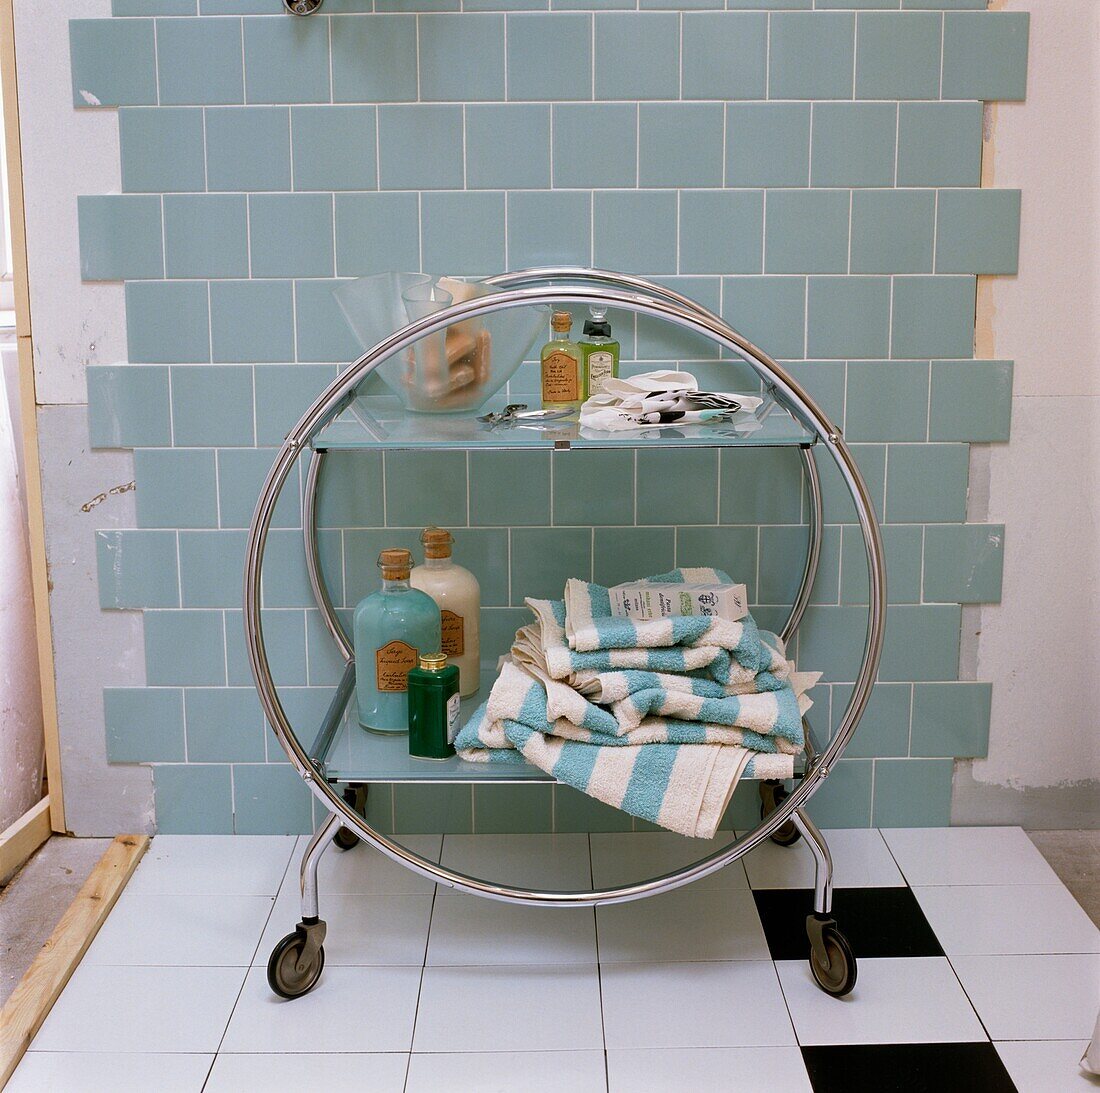 Freestanding bathroom unit in partially tiled room